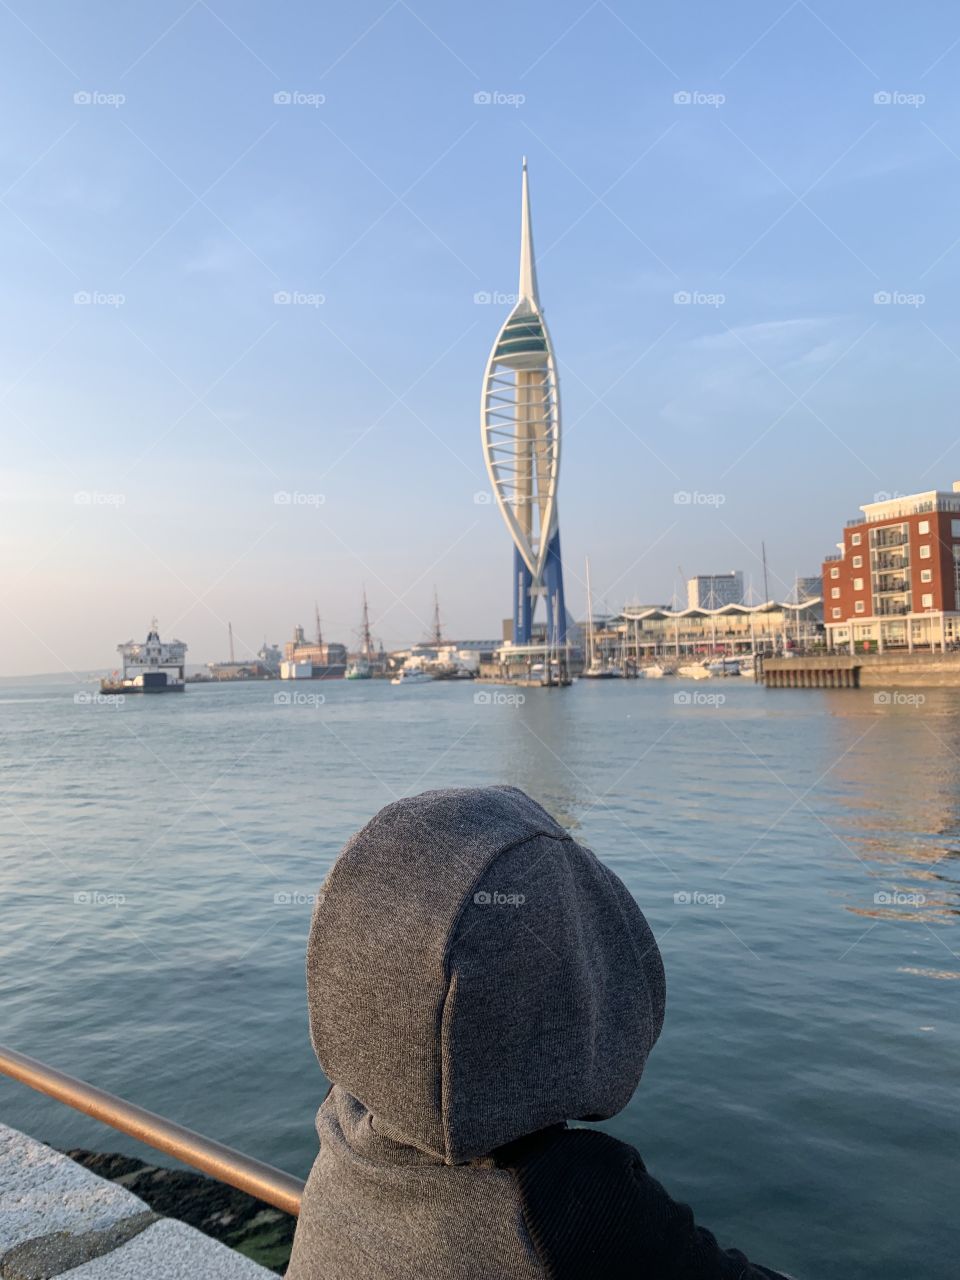 Spinnaker Tower Portsmouth calm waters